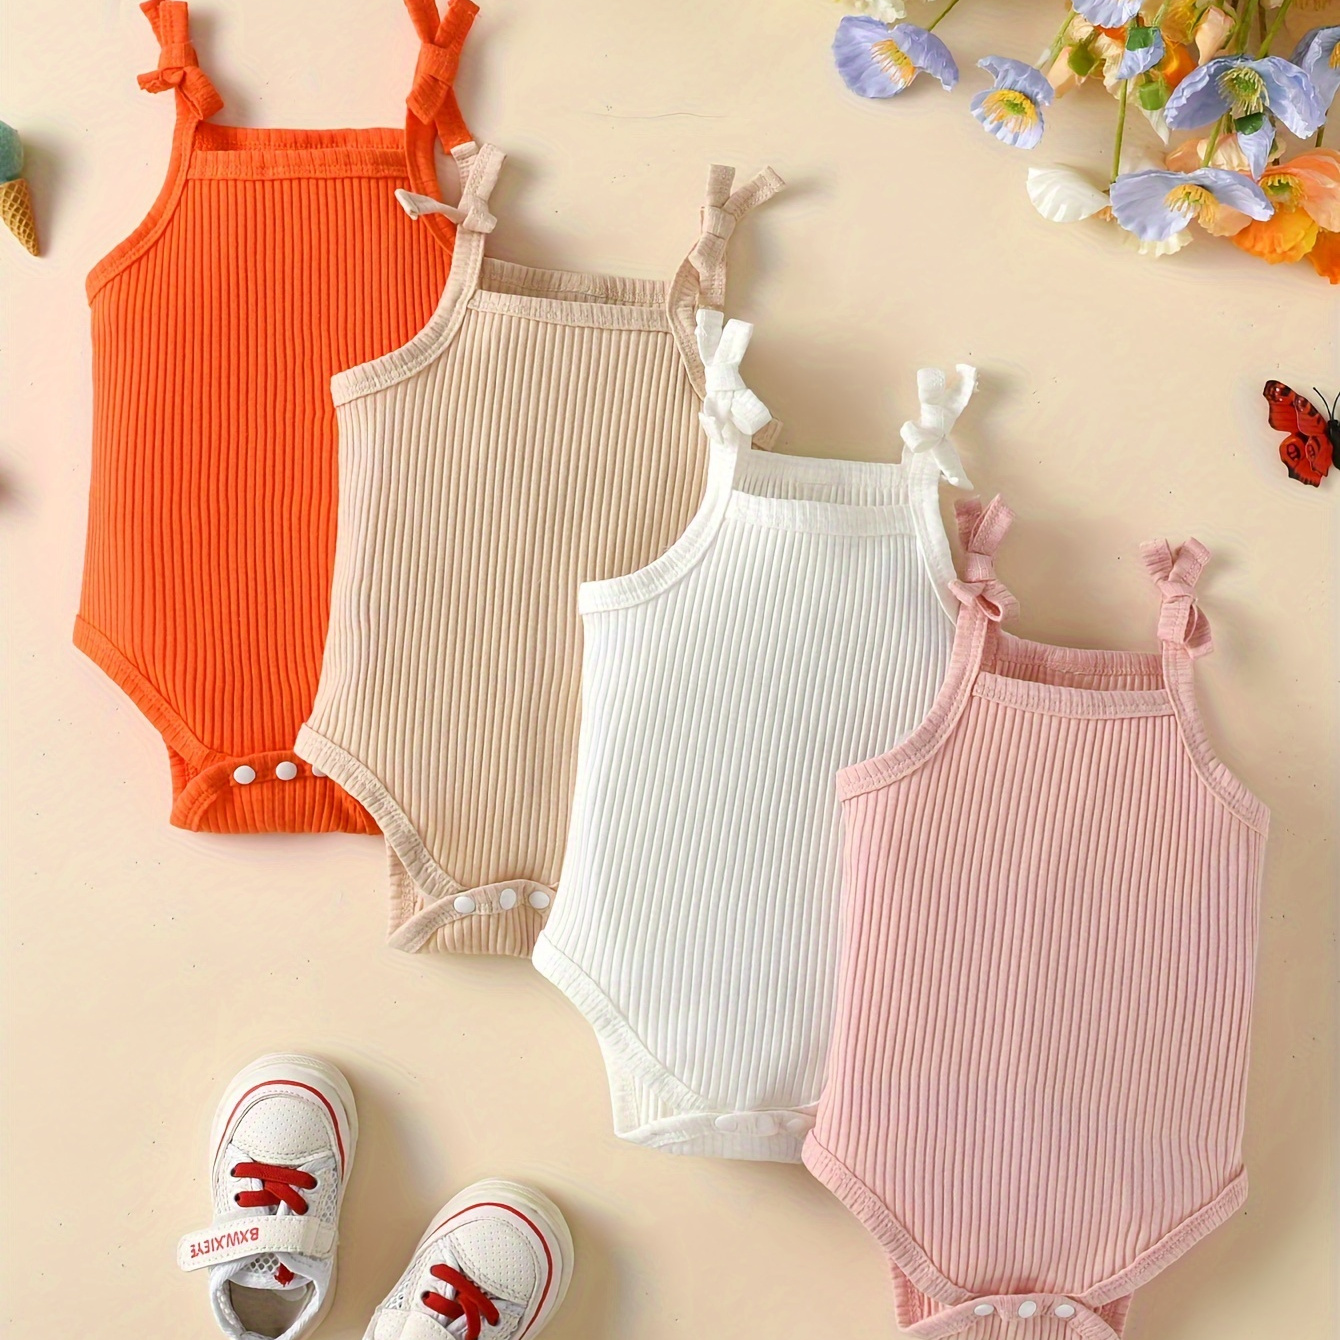 

4pcs Baby's Solid Color Ribbed Triangle Bodysuit, Casual Sleeveless Cotton Romper, Toddler & Infant Girl's Onesie For Summer, As Gift